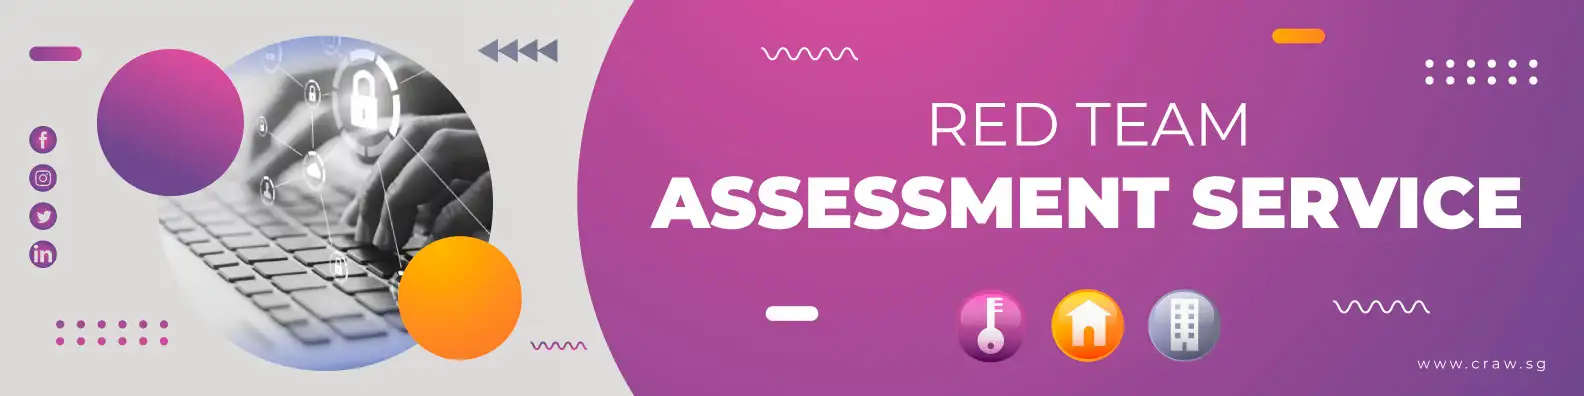 red team assessment service